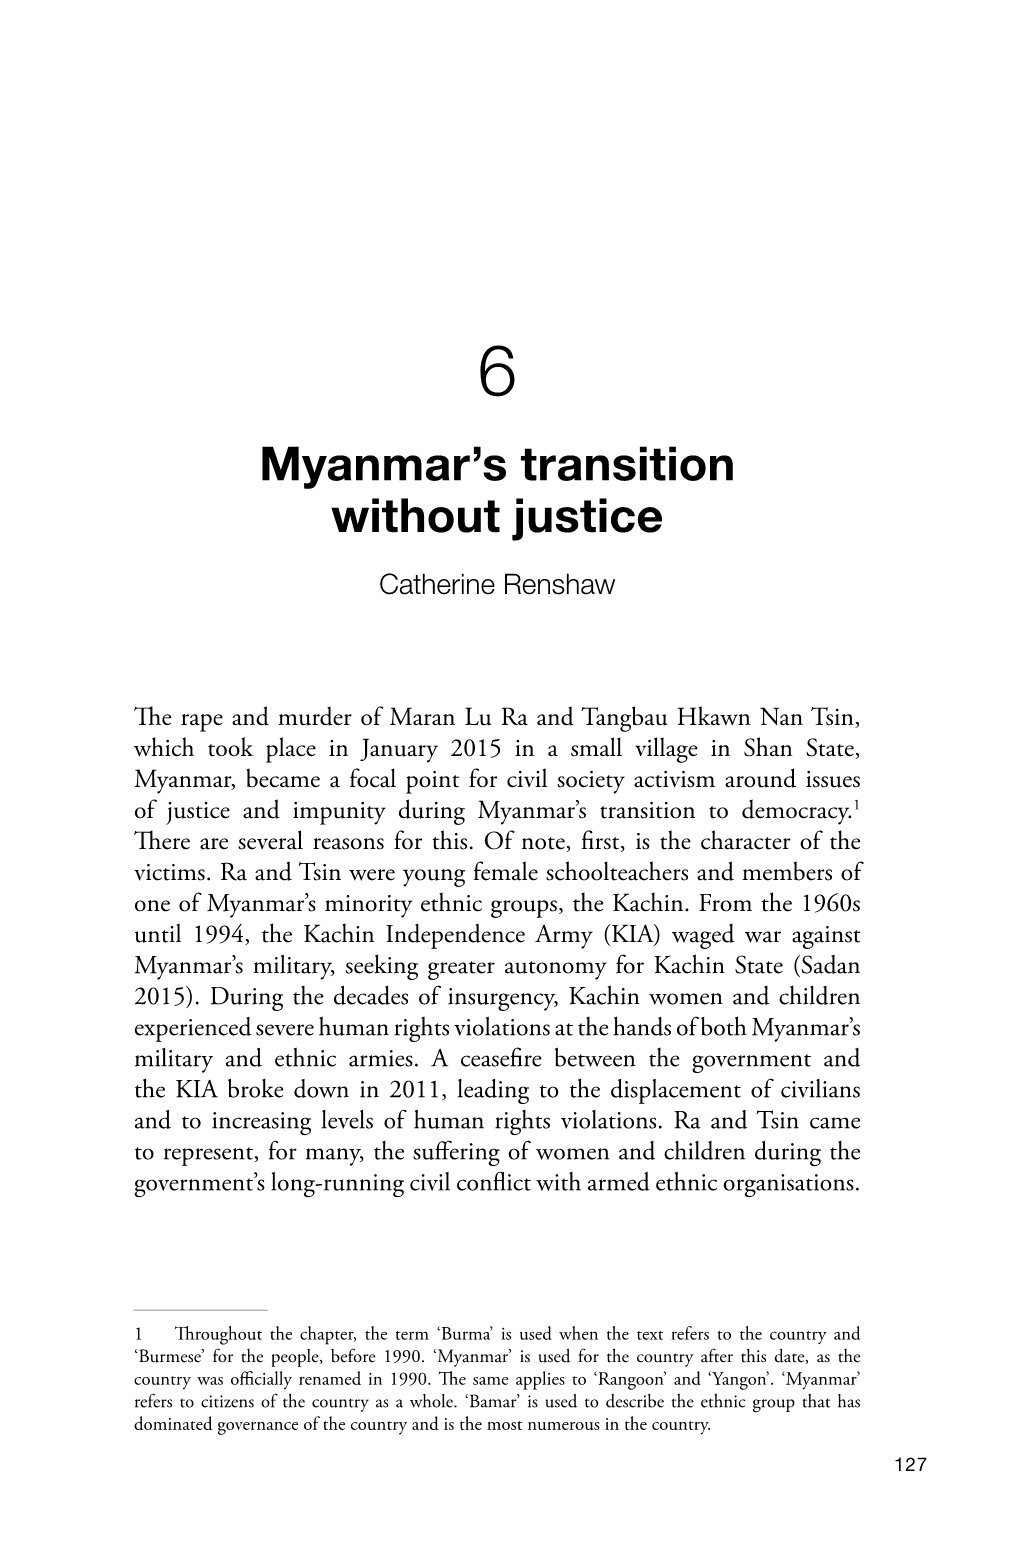 6. Myanmar's Transition Without Justice